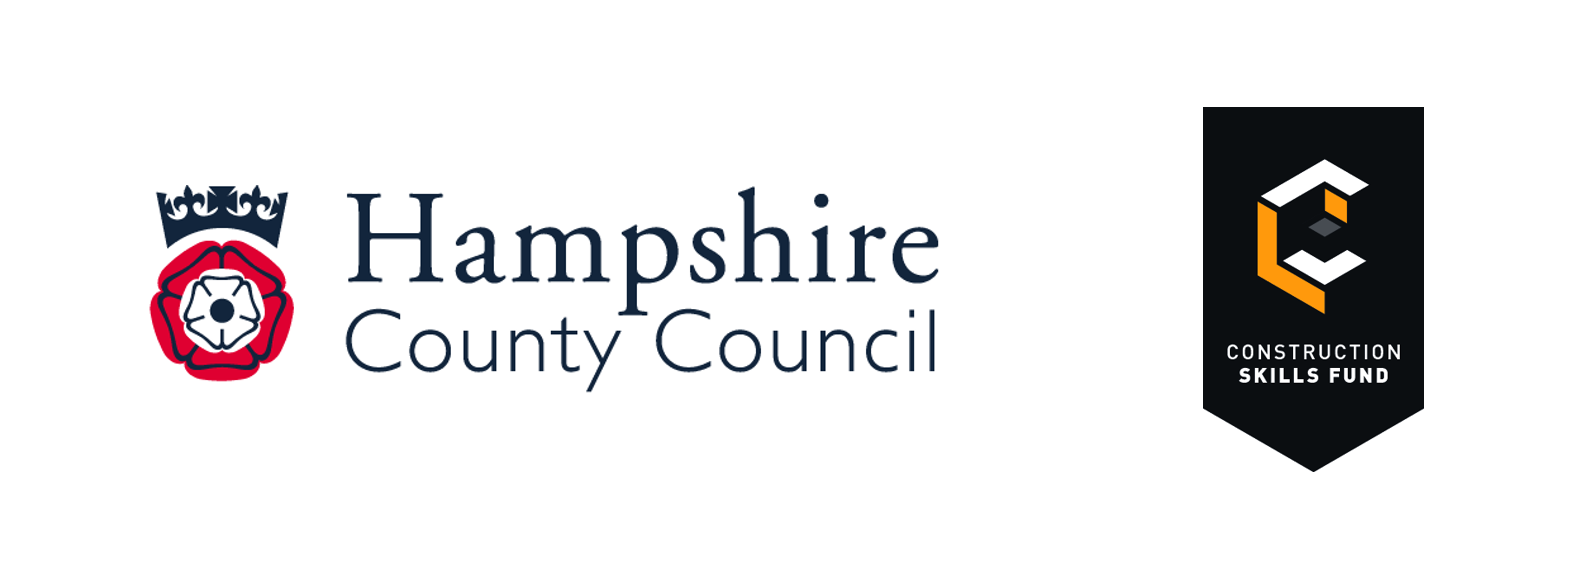 Hampshire County Council & Construction Skills Fund